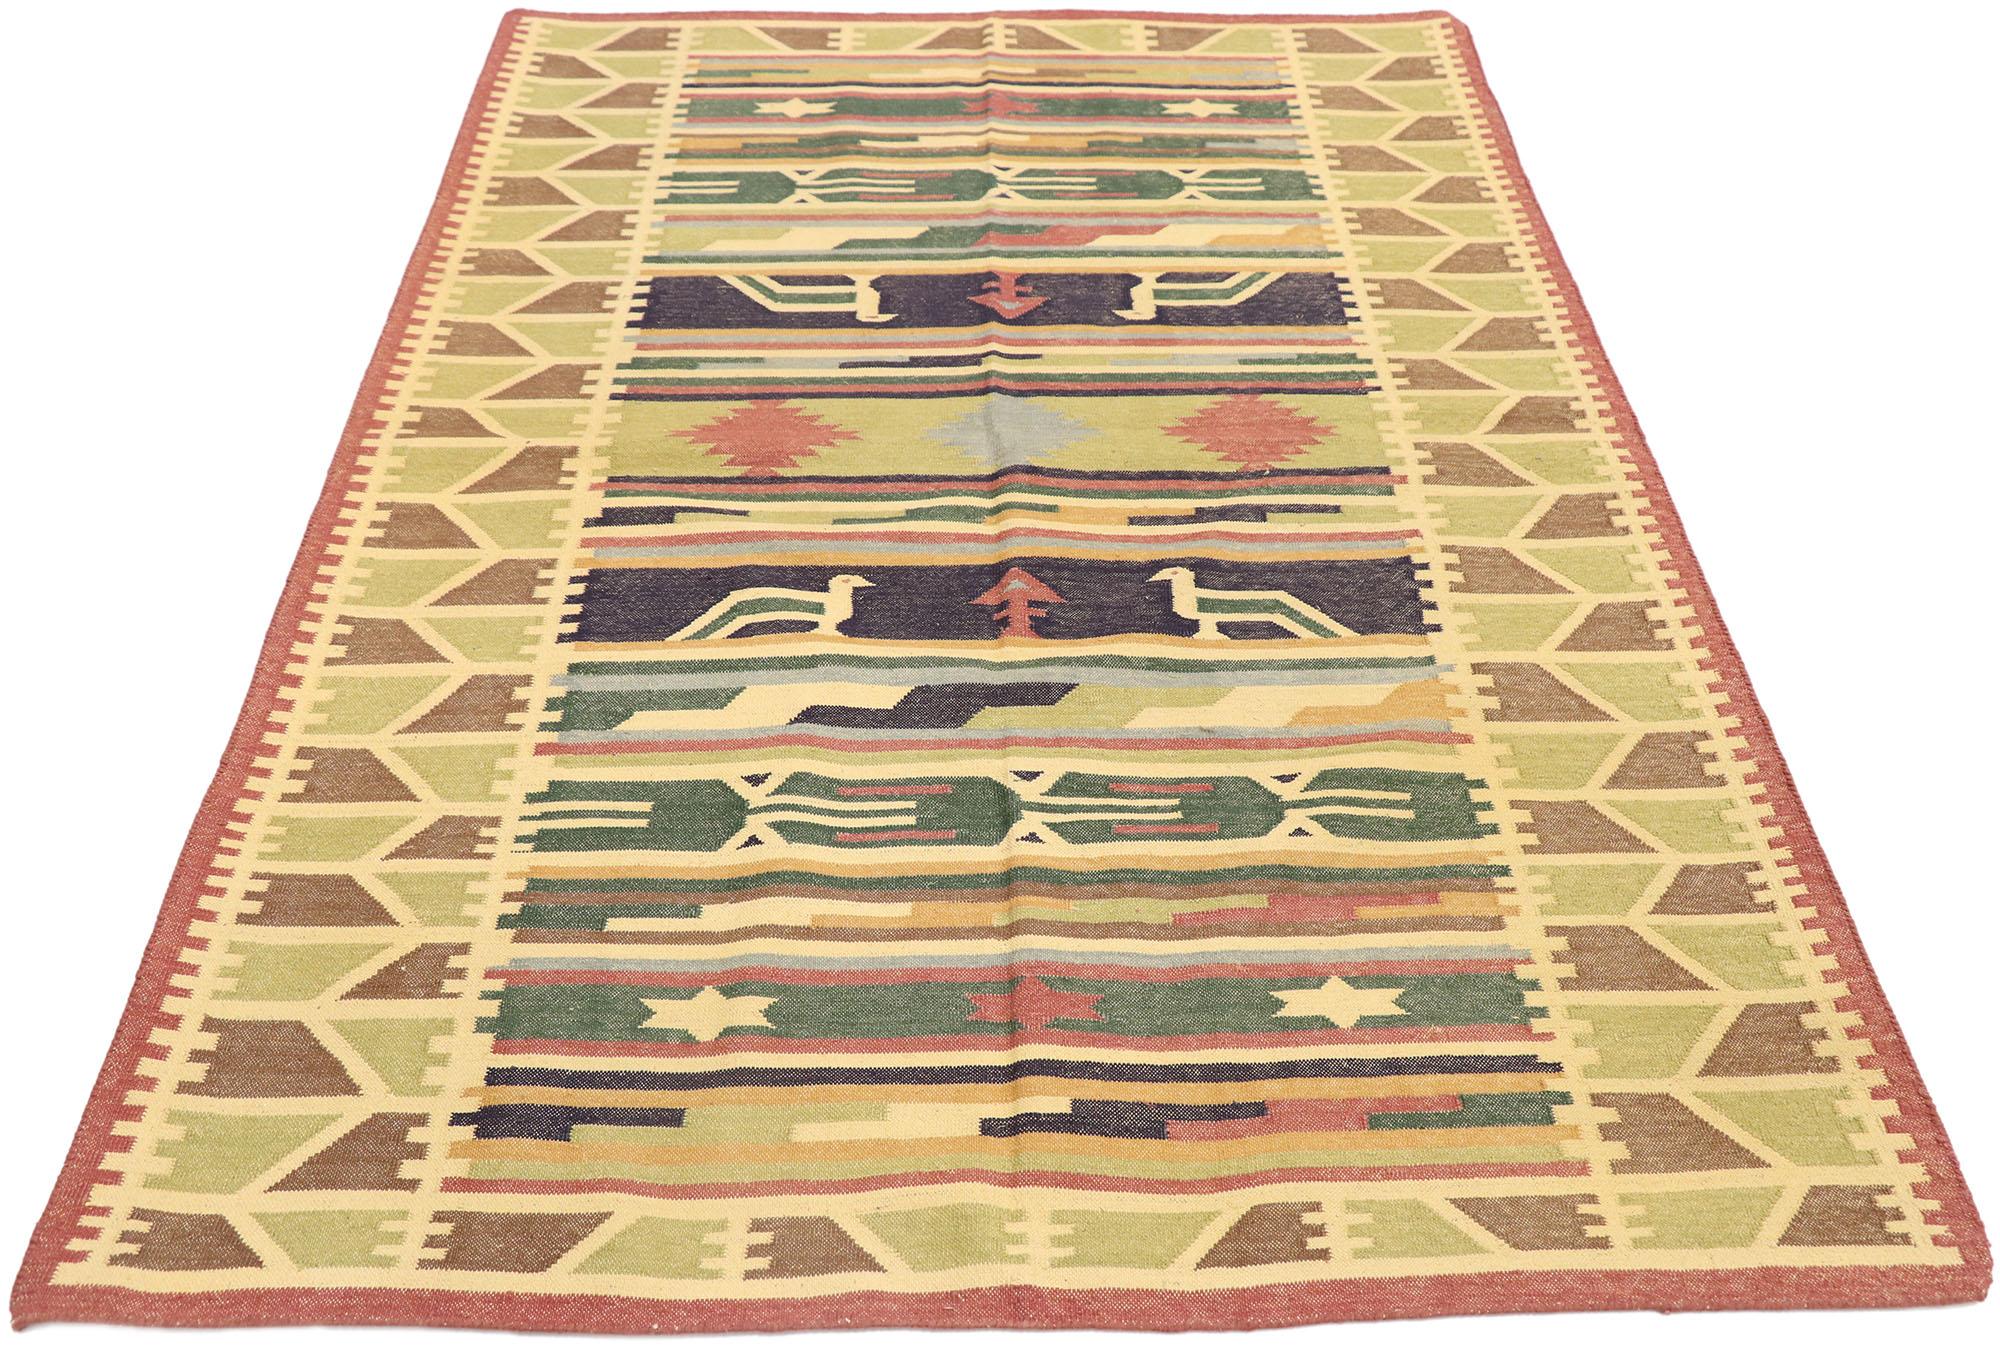 Hand-Woven Vintage Indian Stone Wash Dhurrie Rug with Folk Art Tribal Style For Sale